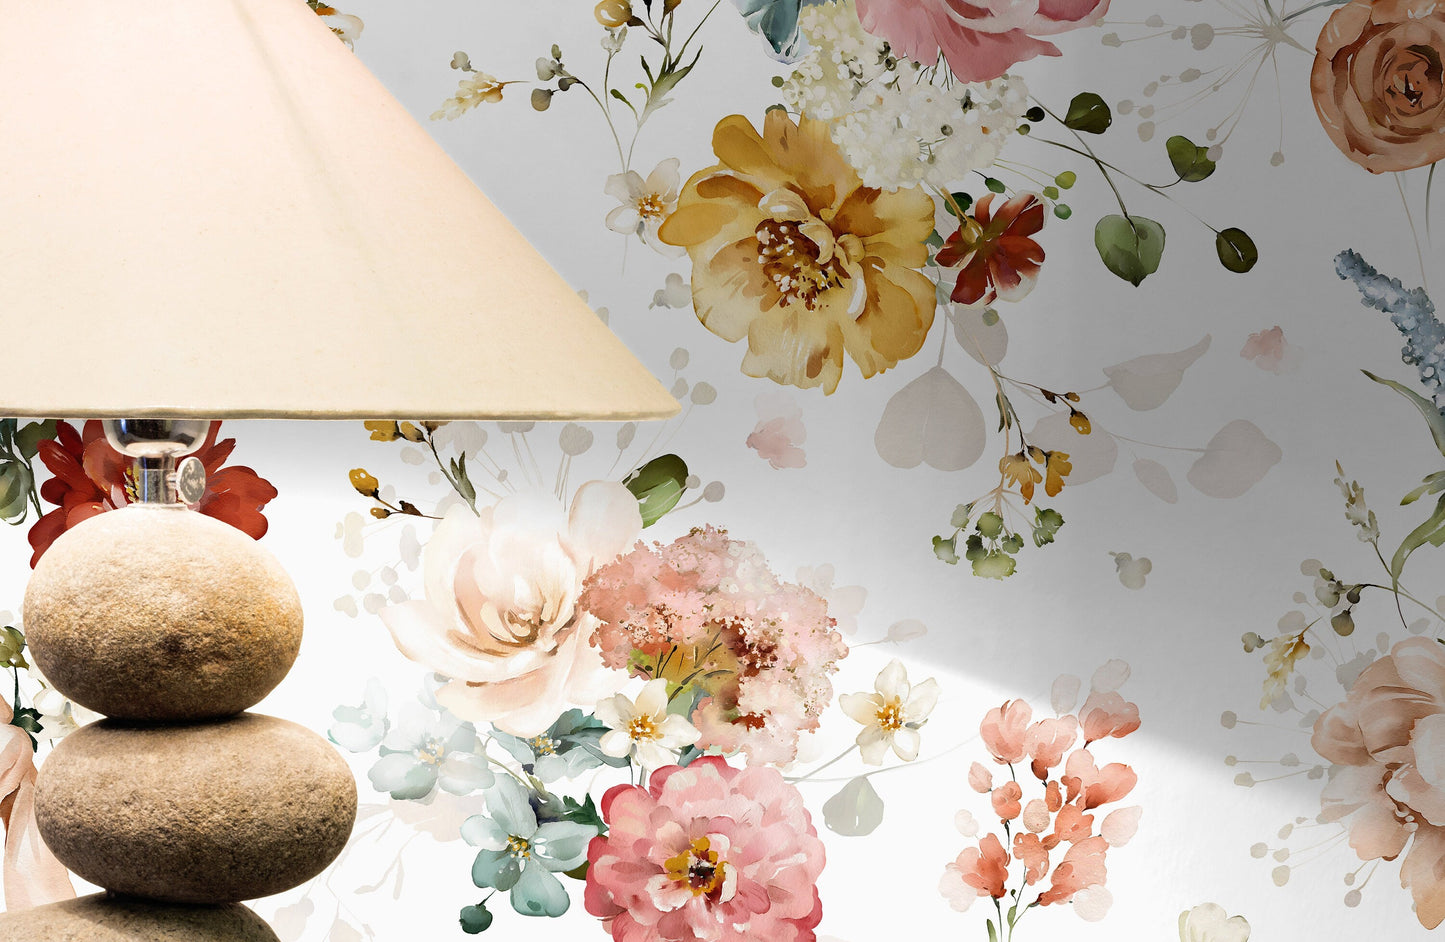 Vintage Flowers Watercolor Wallpaper / Peel and Stick Wallpaper Removable Wallpaper Home Decor Wall Art Wall Decor Room Decor - C821